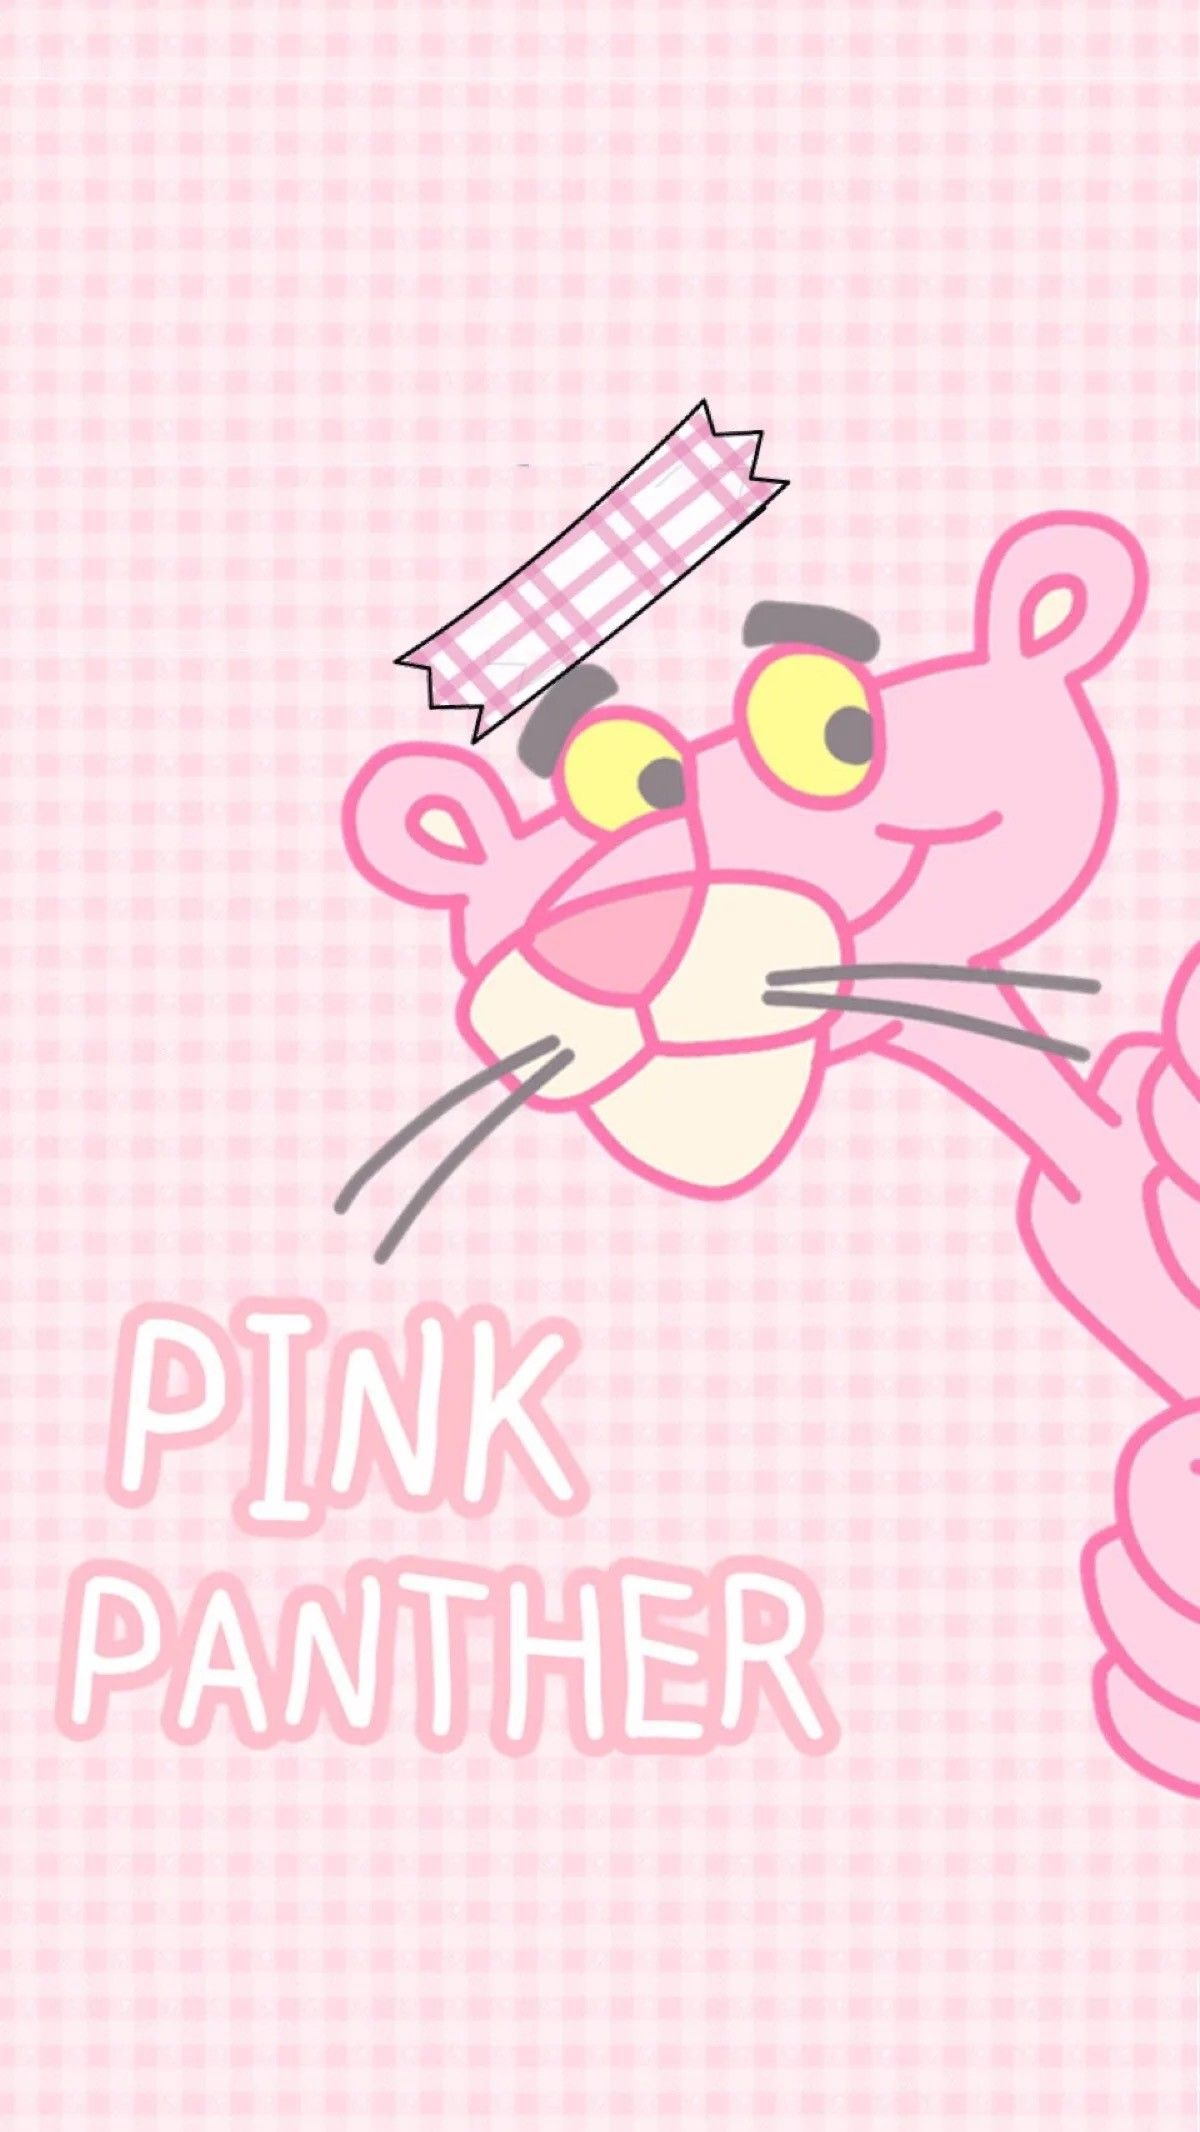 Pink Panther wallpaper for iPhone and Android - Pink Panther